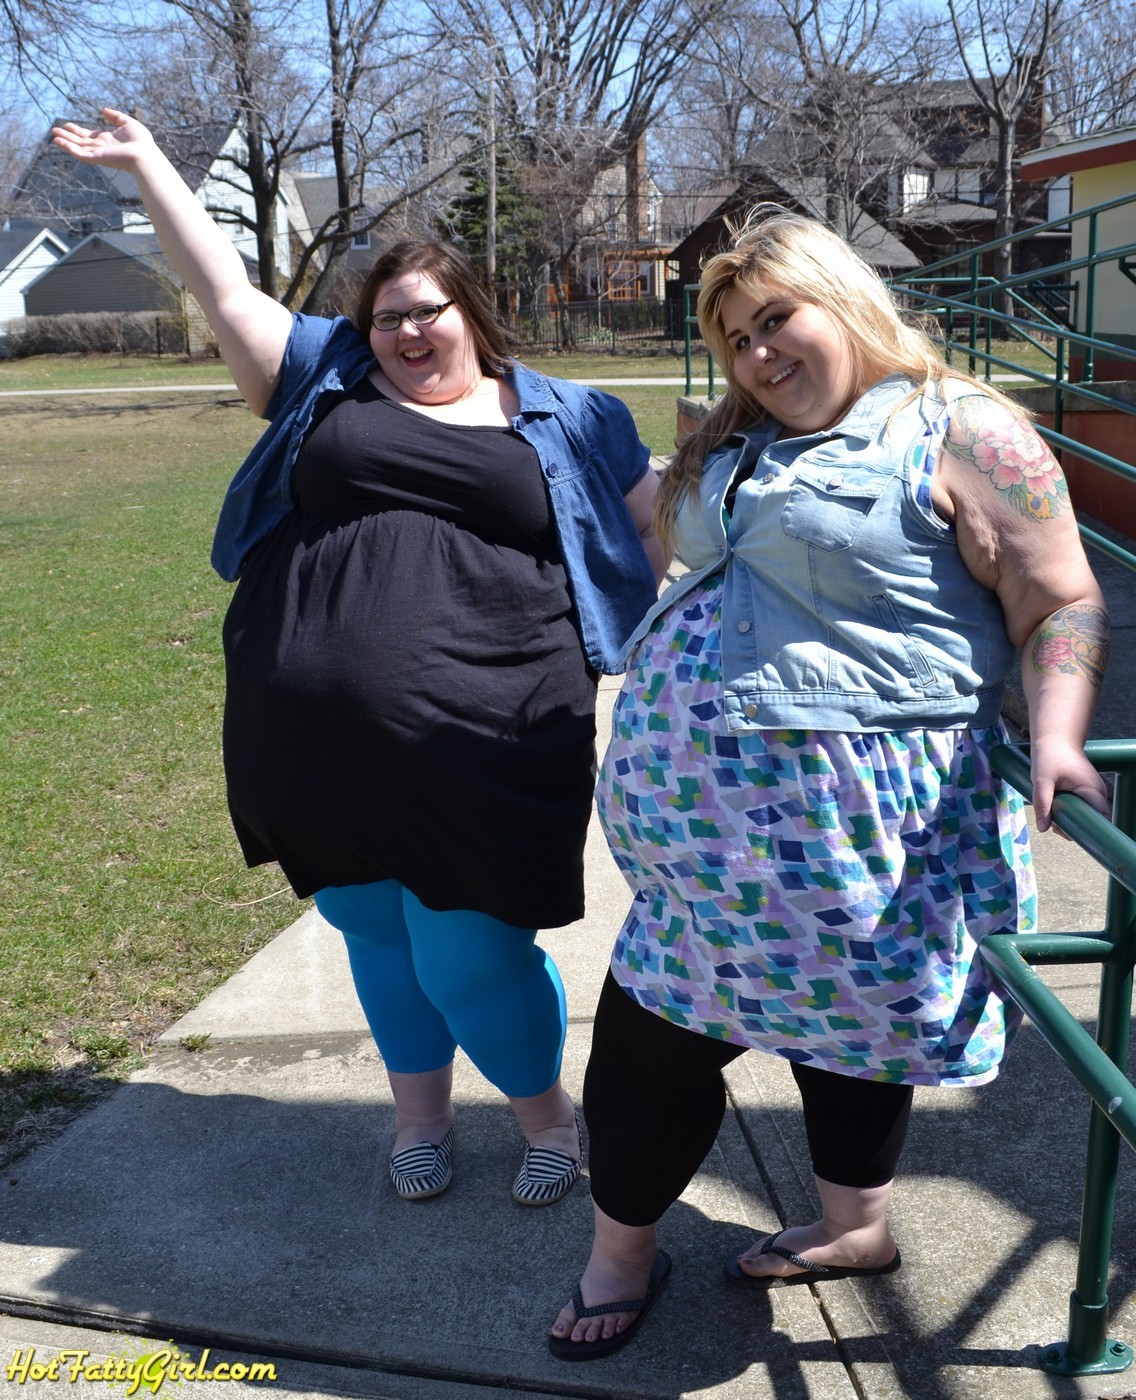 hotfattygirl:  From a recent HotFattyGirl.com update with my BFF Violet James! This